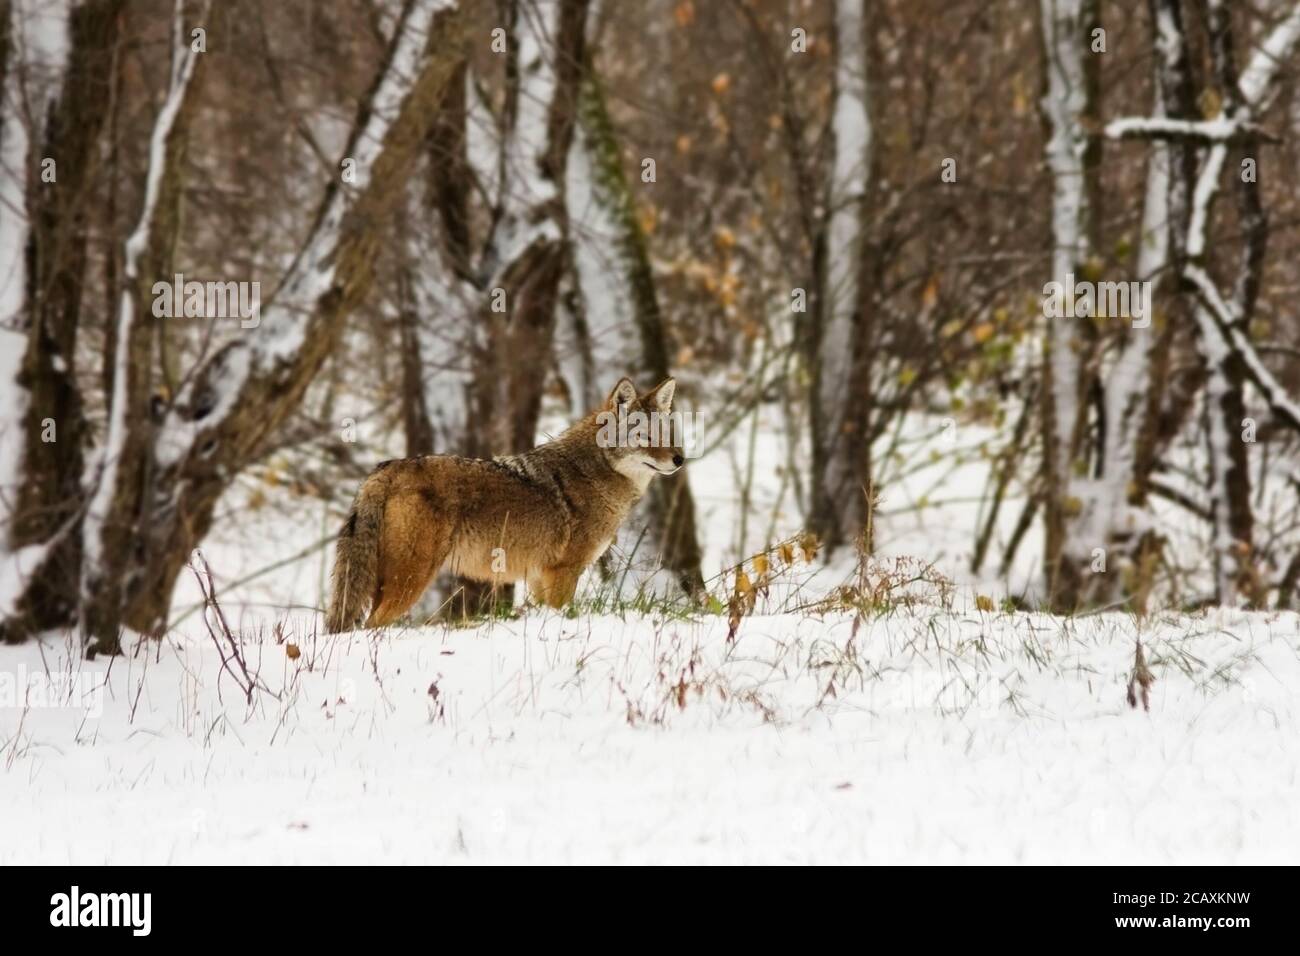 A coyote crosses  the edge of a snow covered forest while on a winter journey. Stock Photo